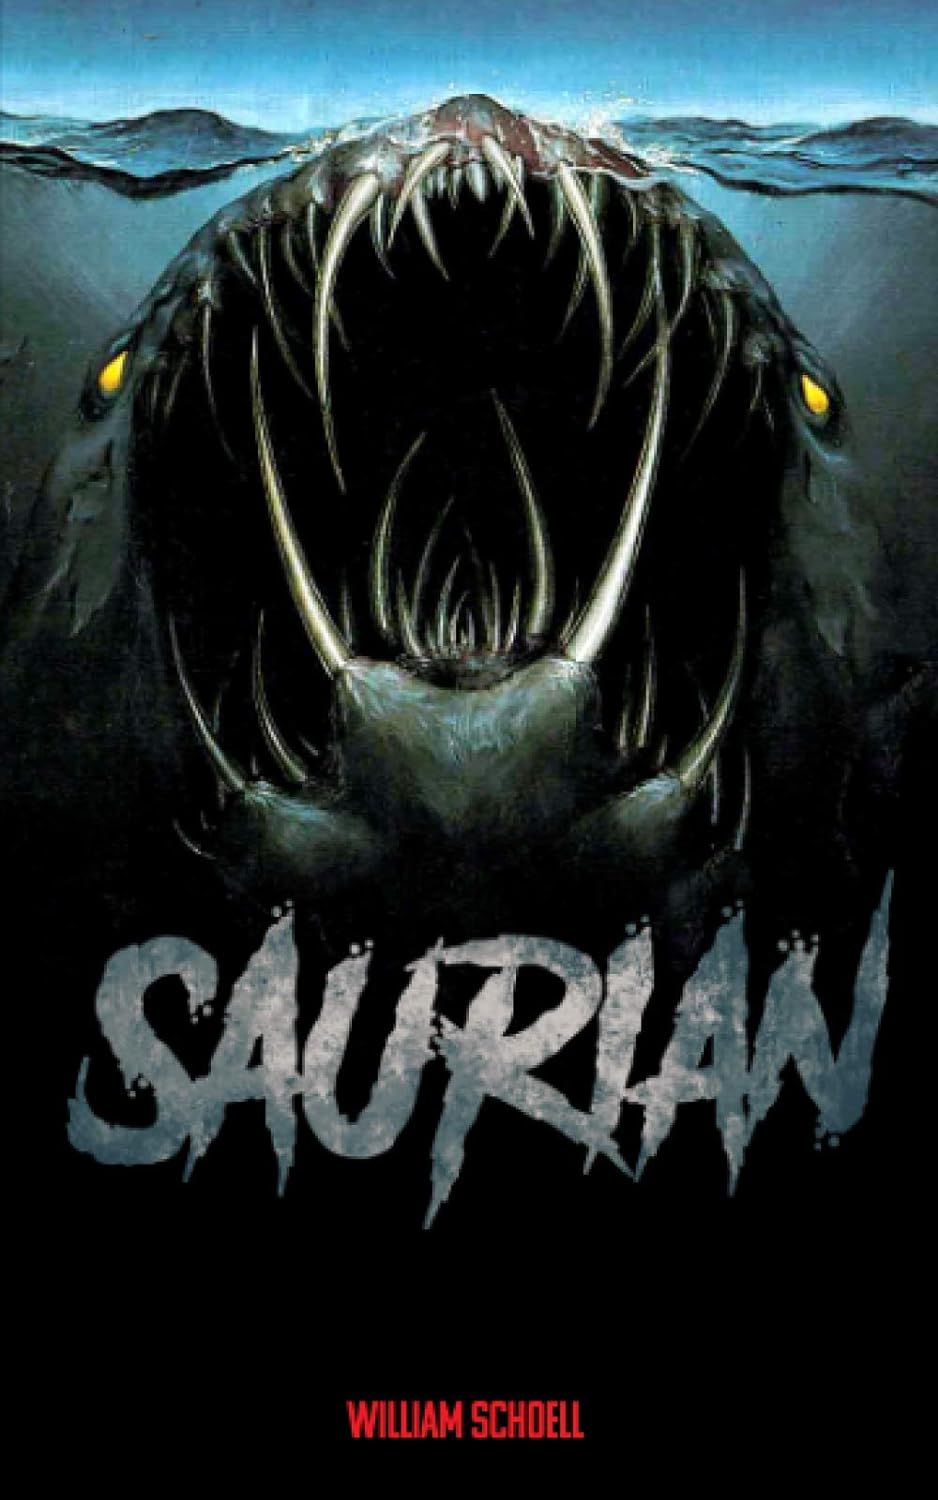 Saurian William Schoell Book Cover